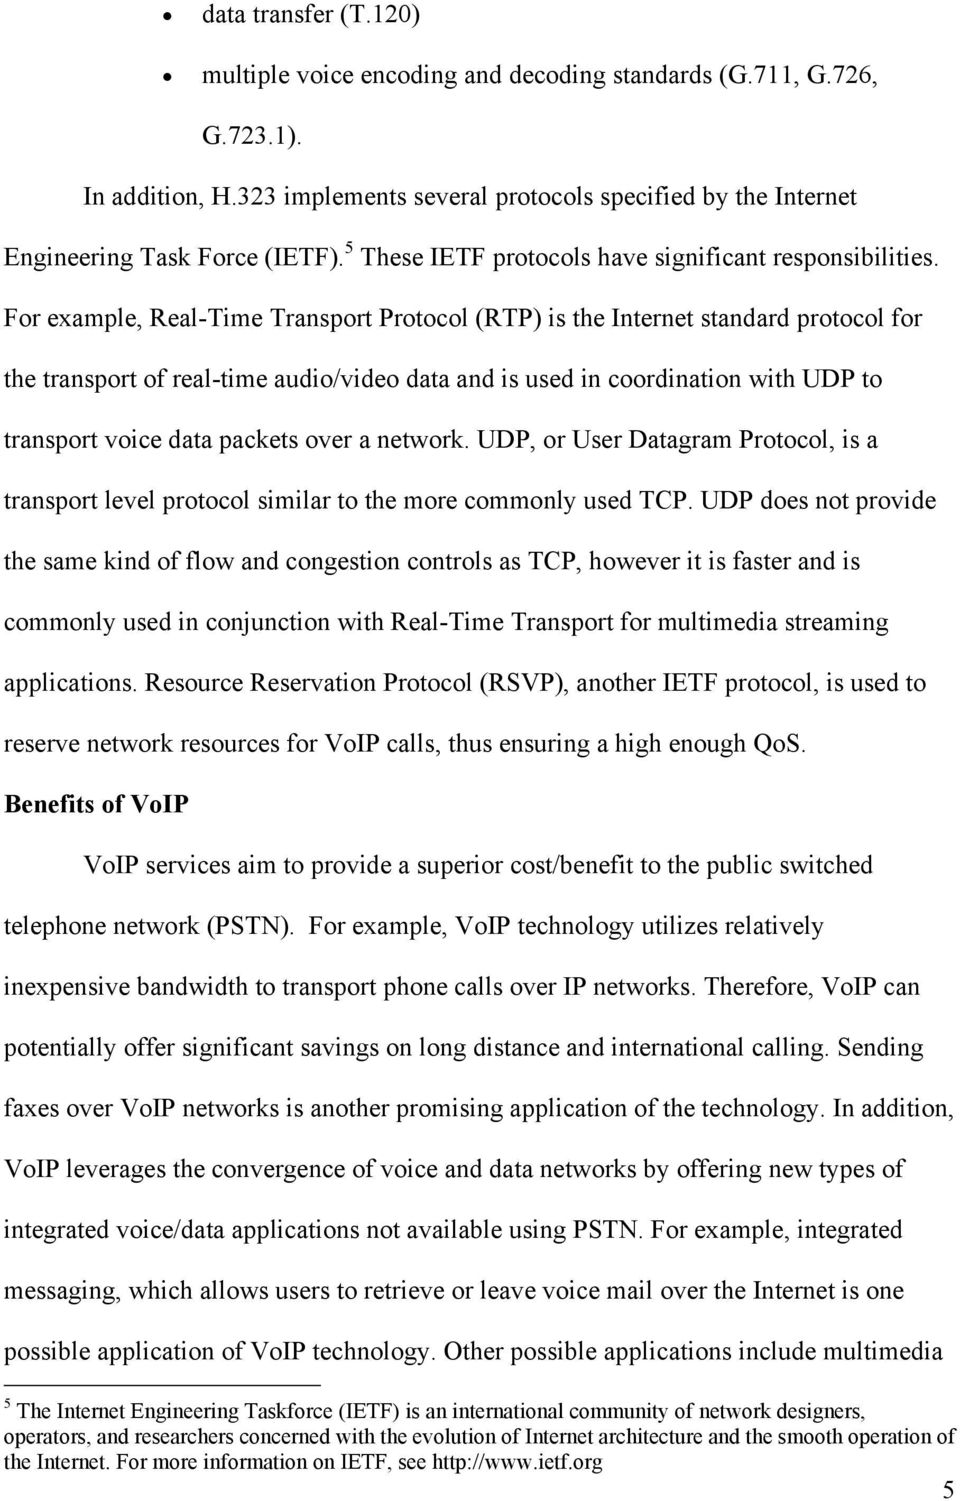 For example, Real-Time Transport Protocol (RTP) is the Internet standard protocol for the transport of real-time audio/video data and is used in coordination with UDP to transport voice data packets